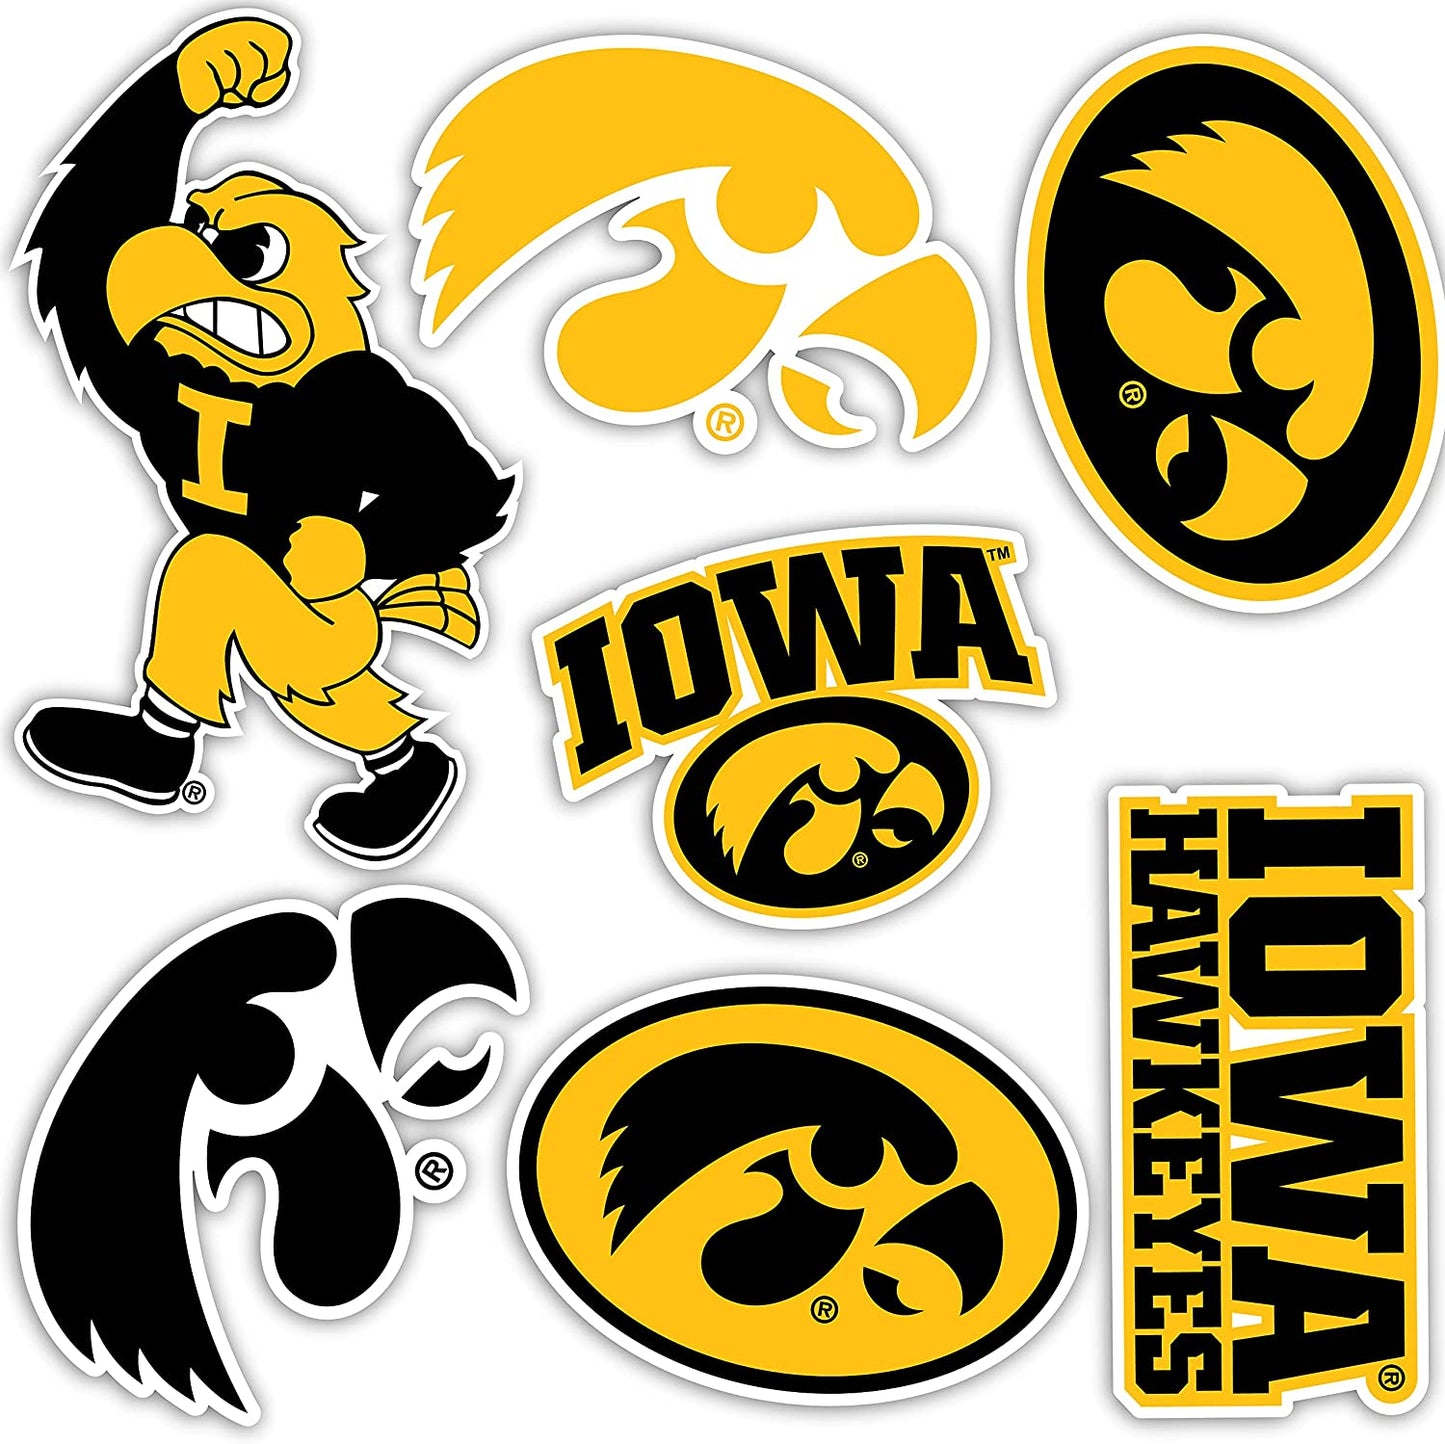 Iowa Hawkeyes Vinyl Stickers-Your Private Bar